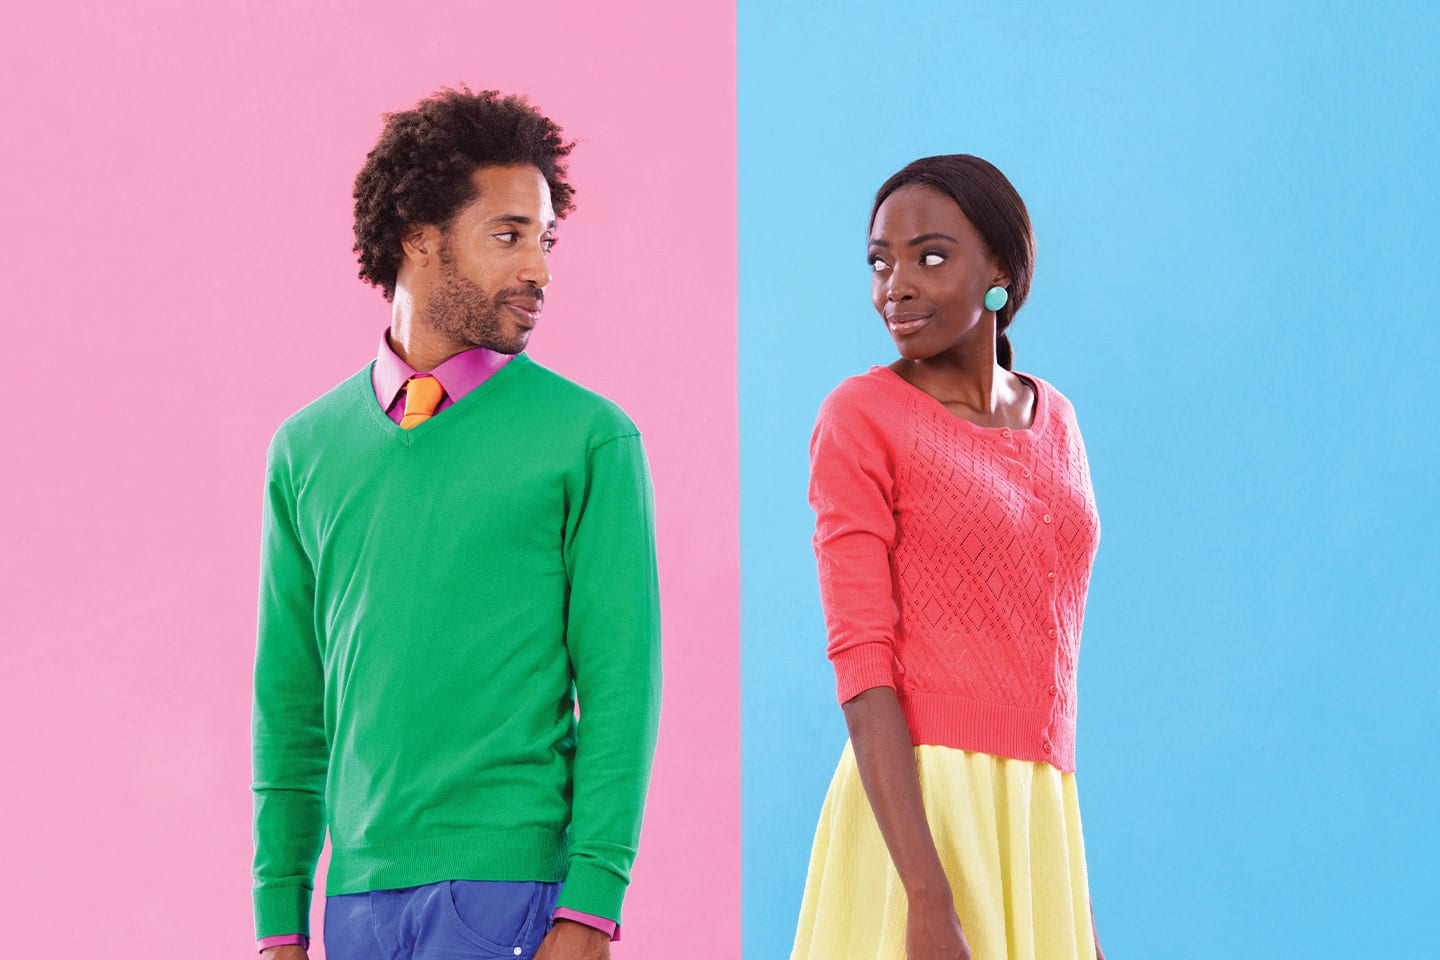 Man and woman in colorful clothes standing and looking back at each other